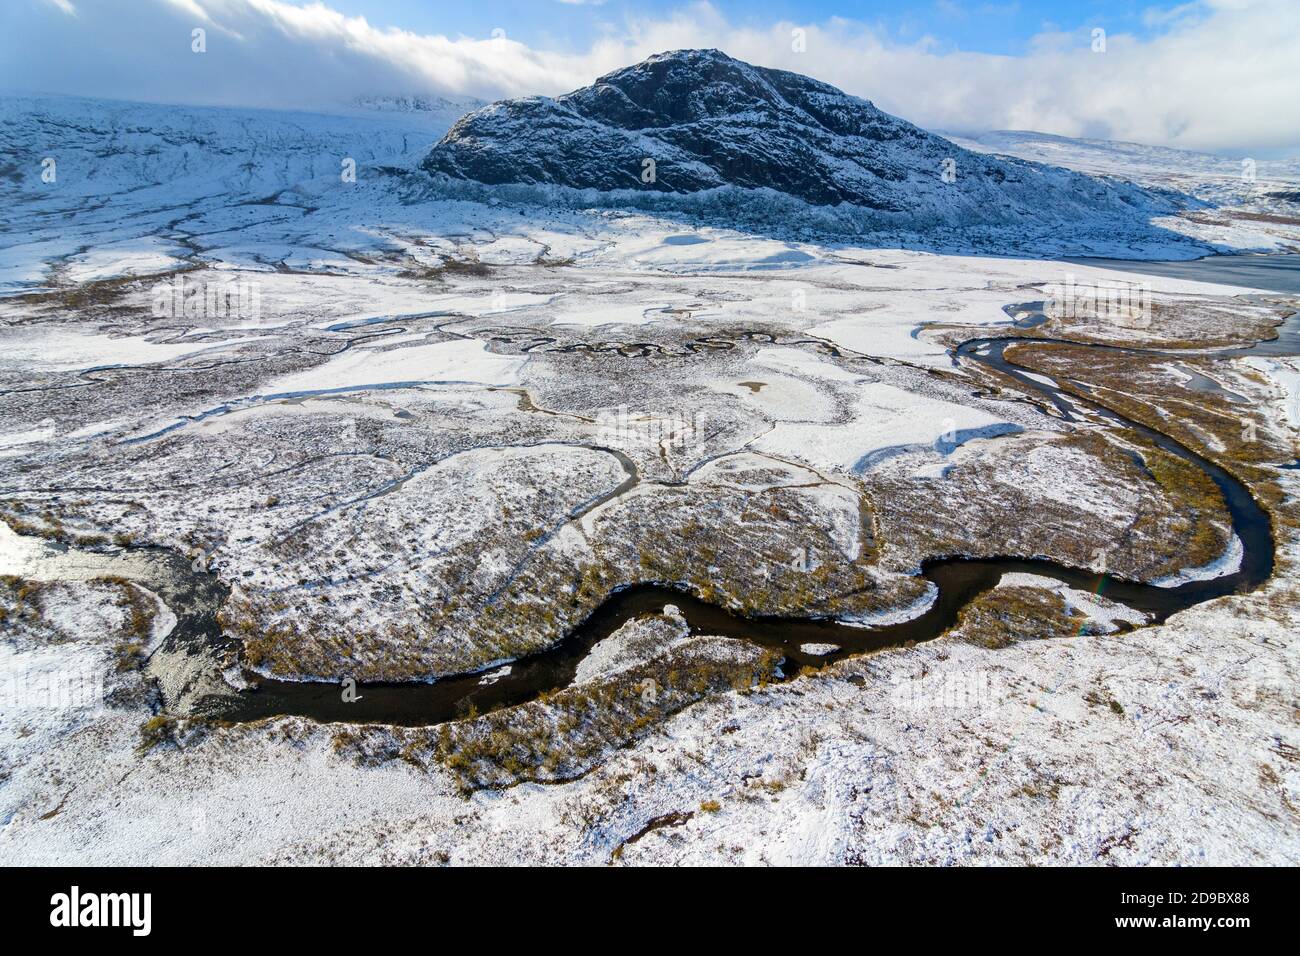 Aerial view of a river winding through an arctic landscape with snow during autumn with Rásek mountain in Stora Sjöfallet National Park, Sweden Stock Photo